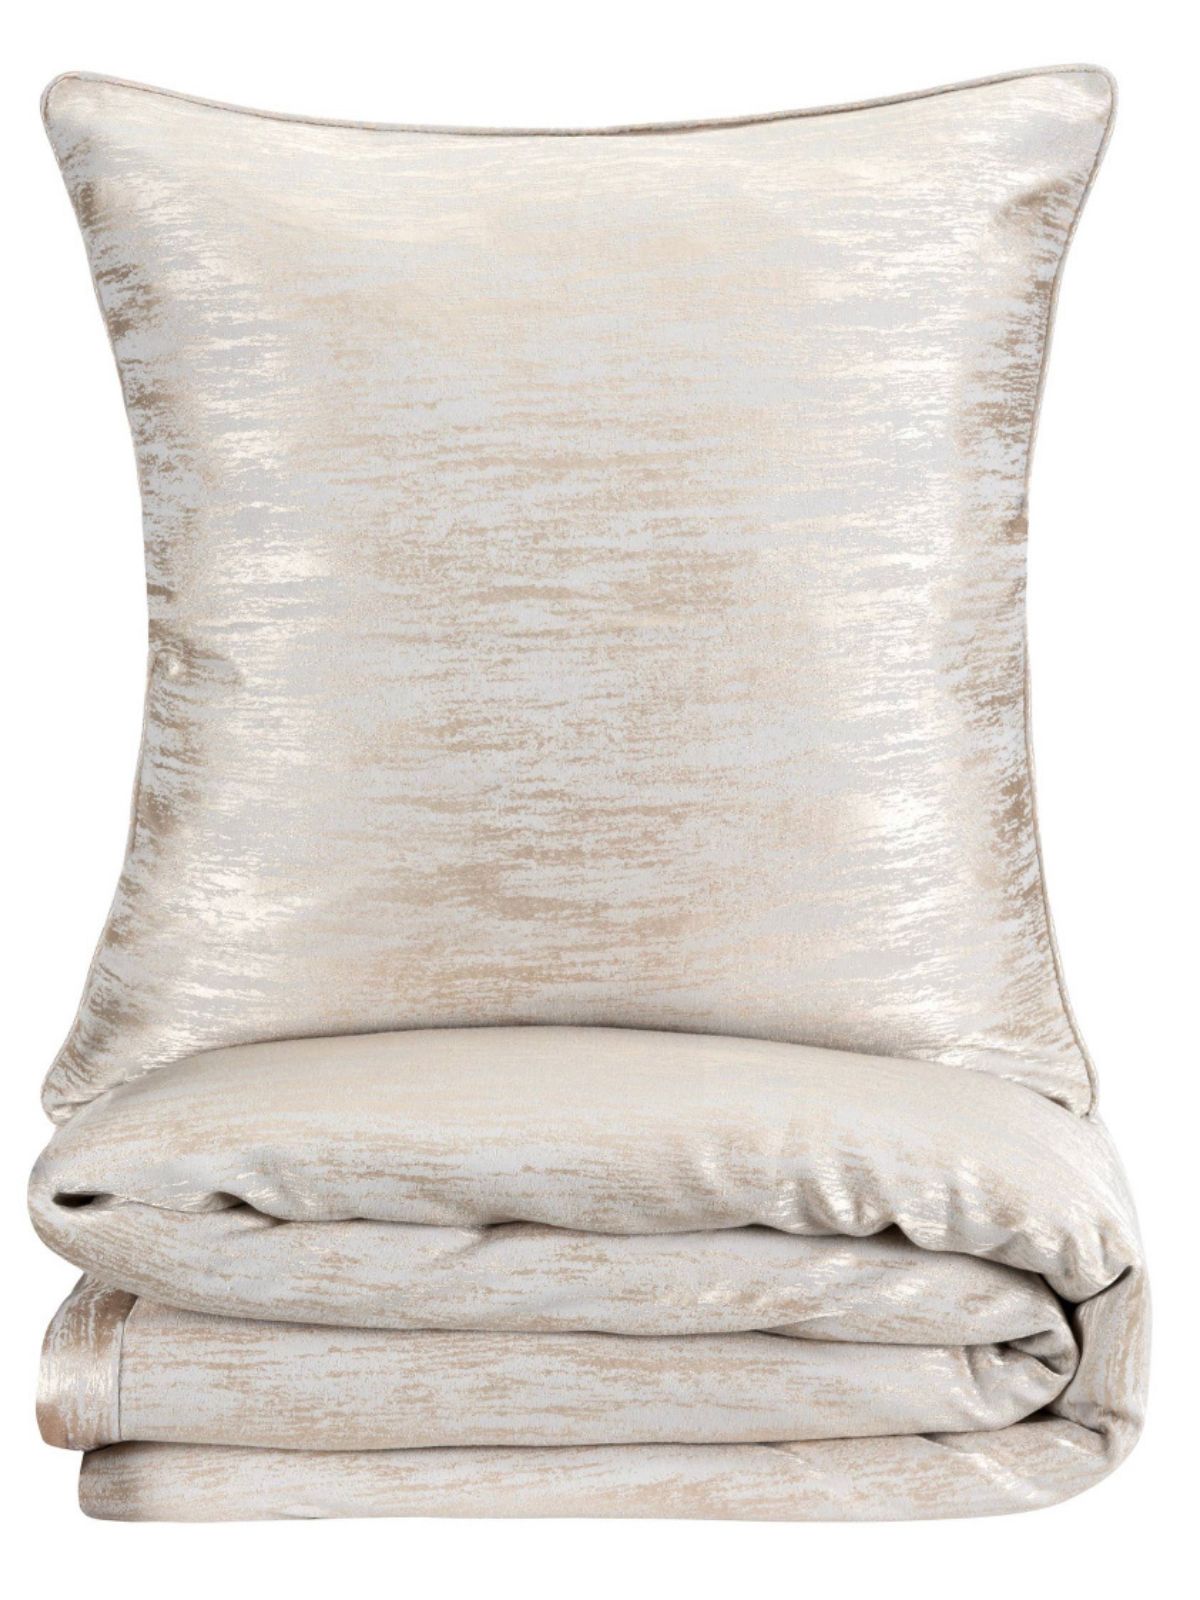 Gold Jacquard Duvet with matching standard shams. Flange on Duvet and shams sold by KYA Home Decor.